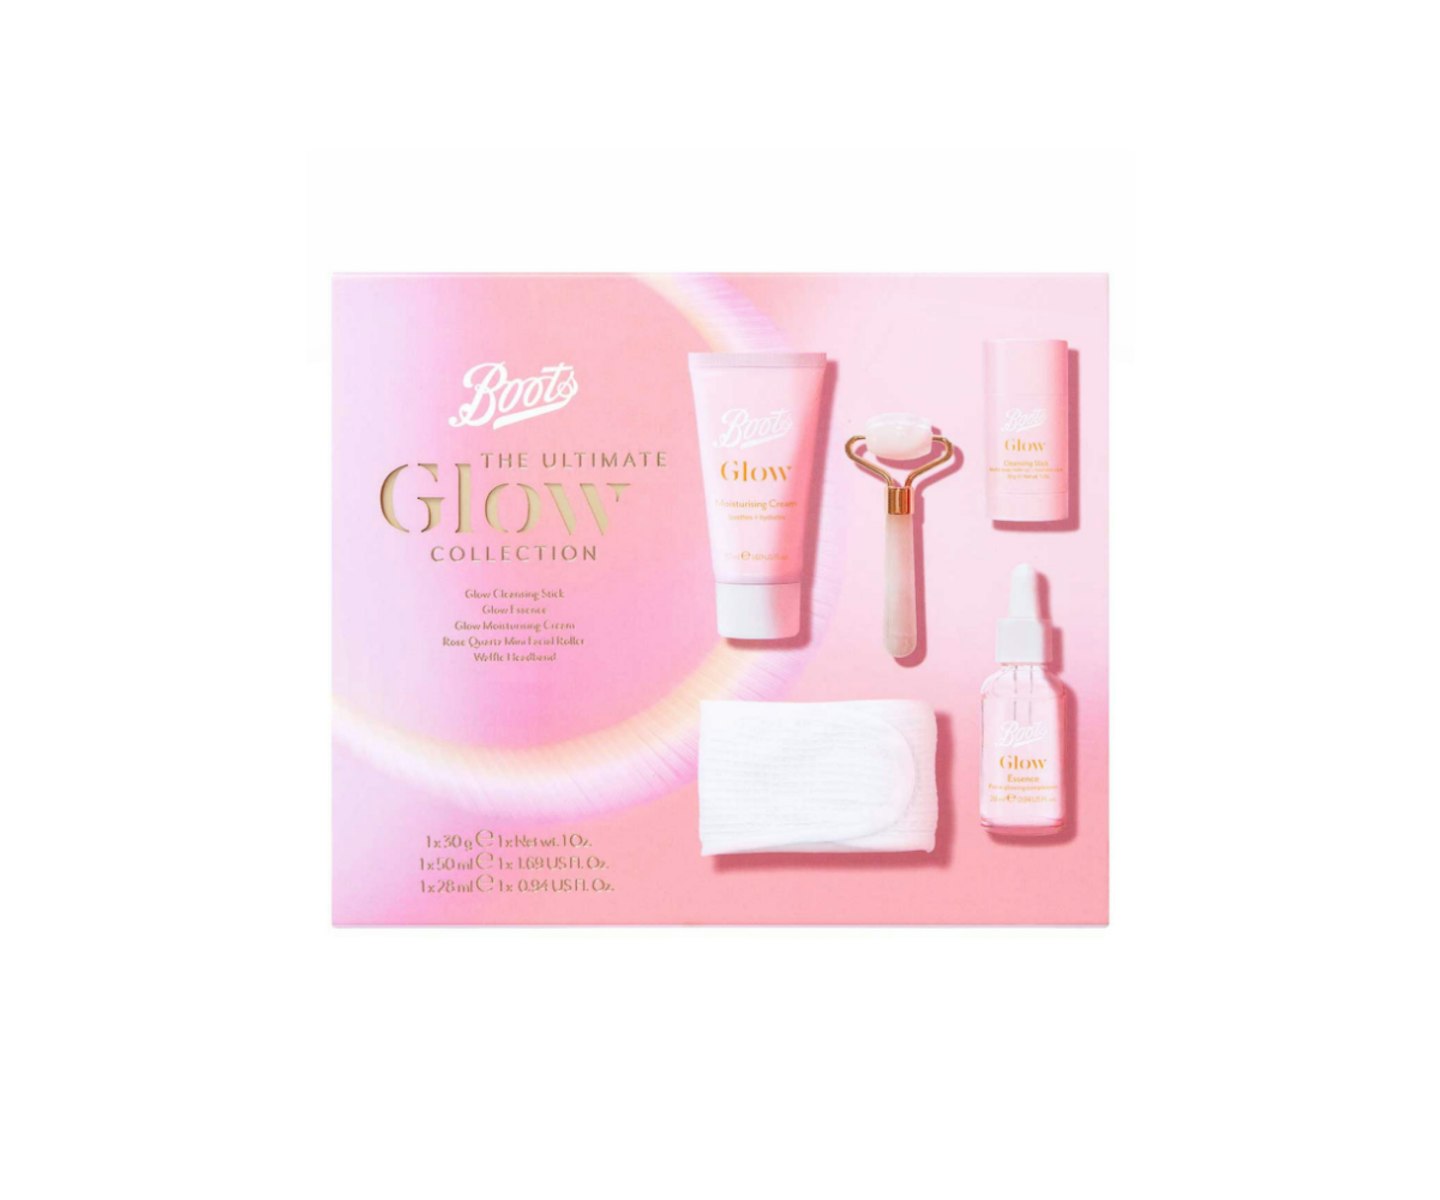 Boots Glow The Ultimate Glow Collection Gift Set